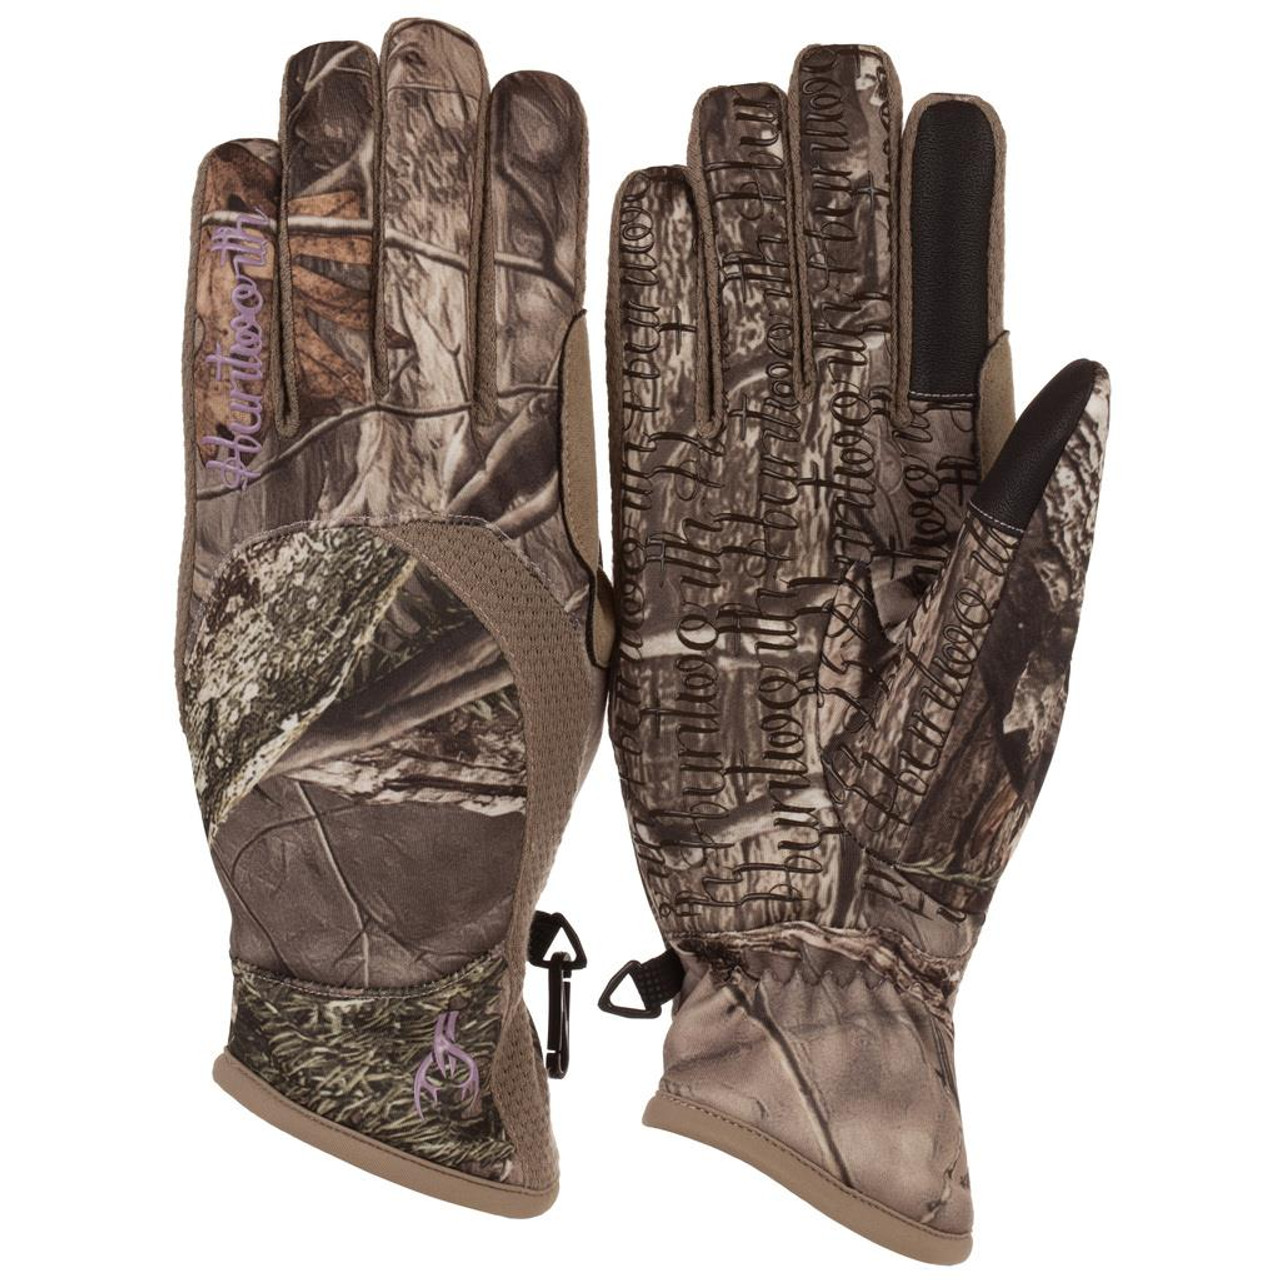 Huntworth Women's Lowden Midweight, Lined Hunting Gloves - Hidd’n®